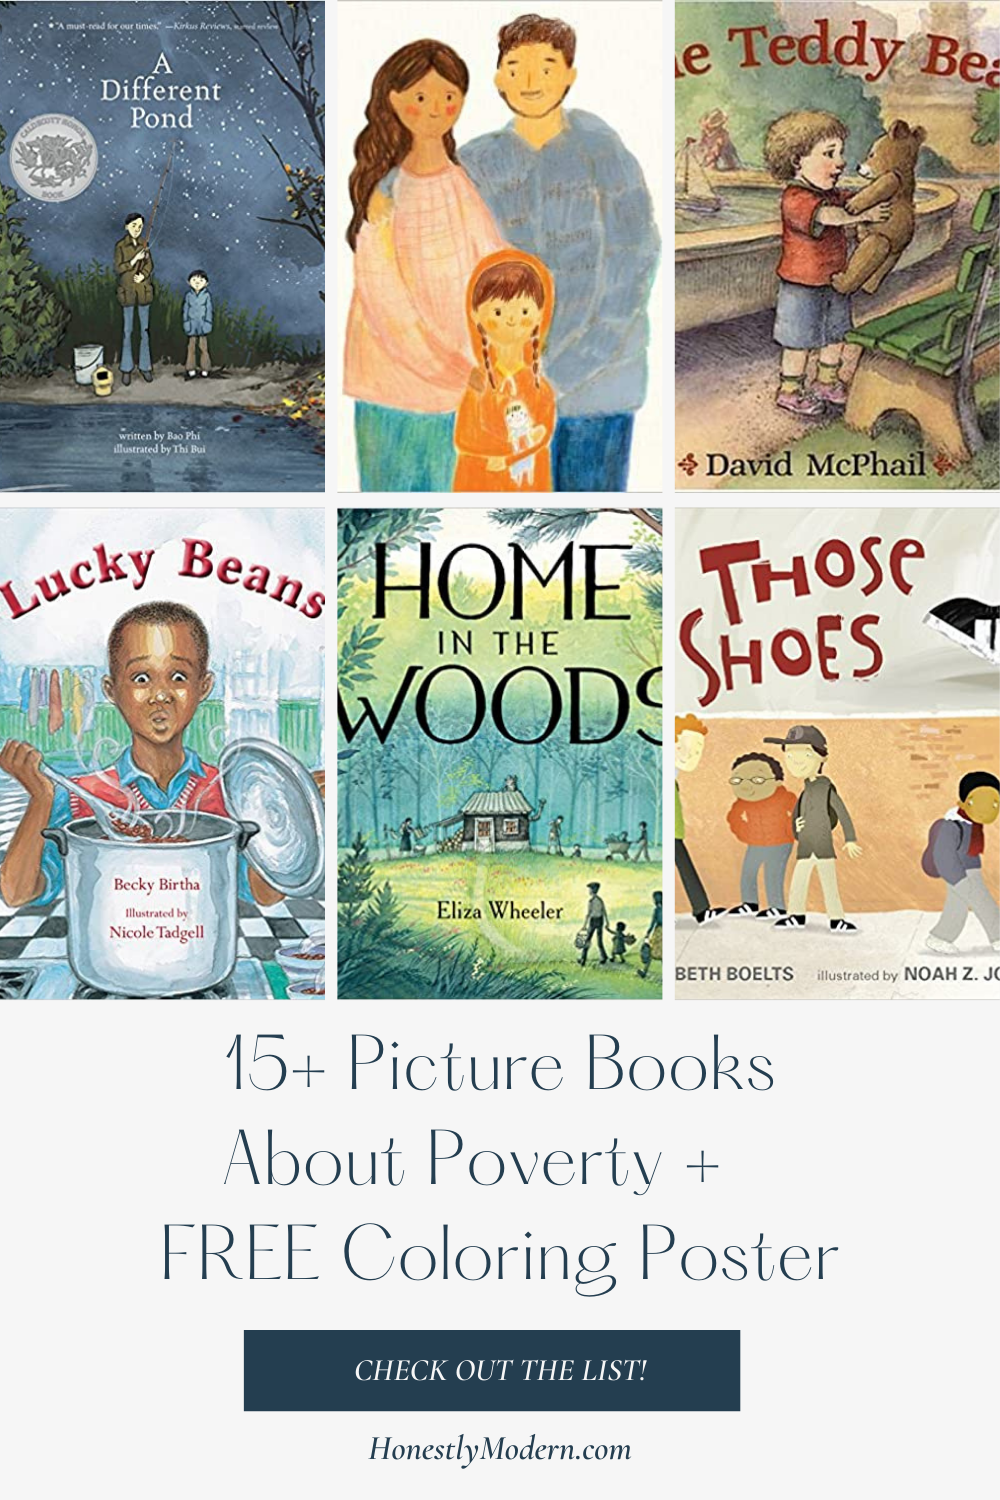 No Poverty | Picture Book List For United Nations Sustainable Development Goal #1